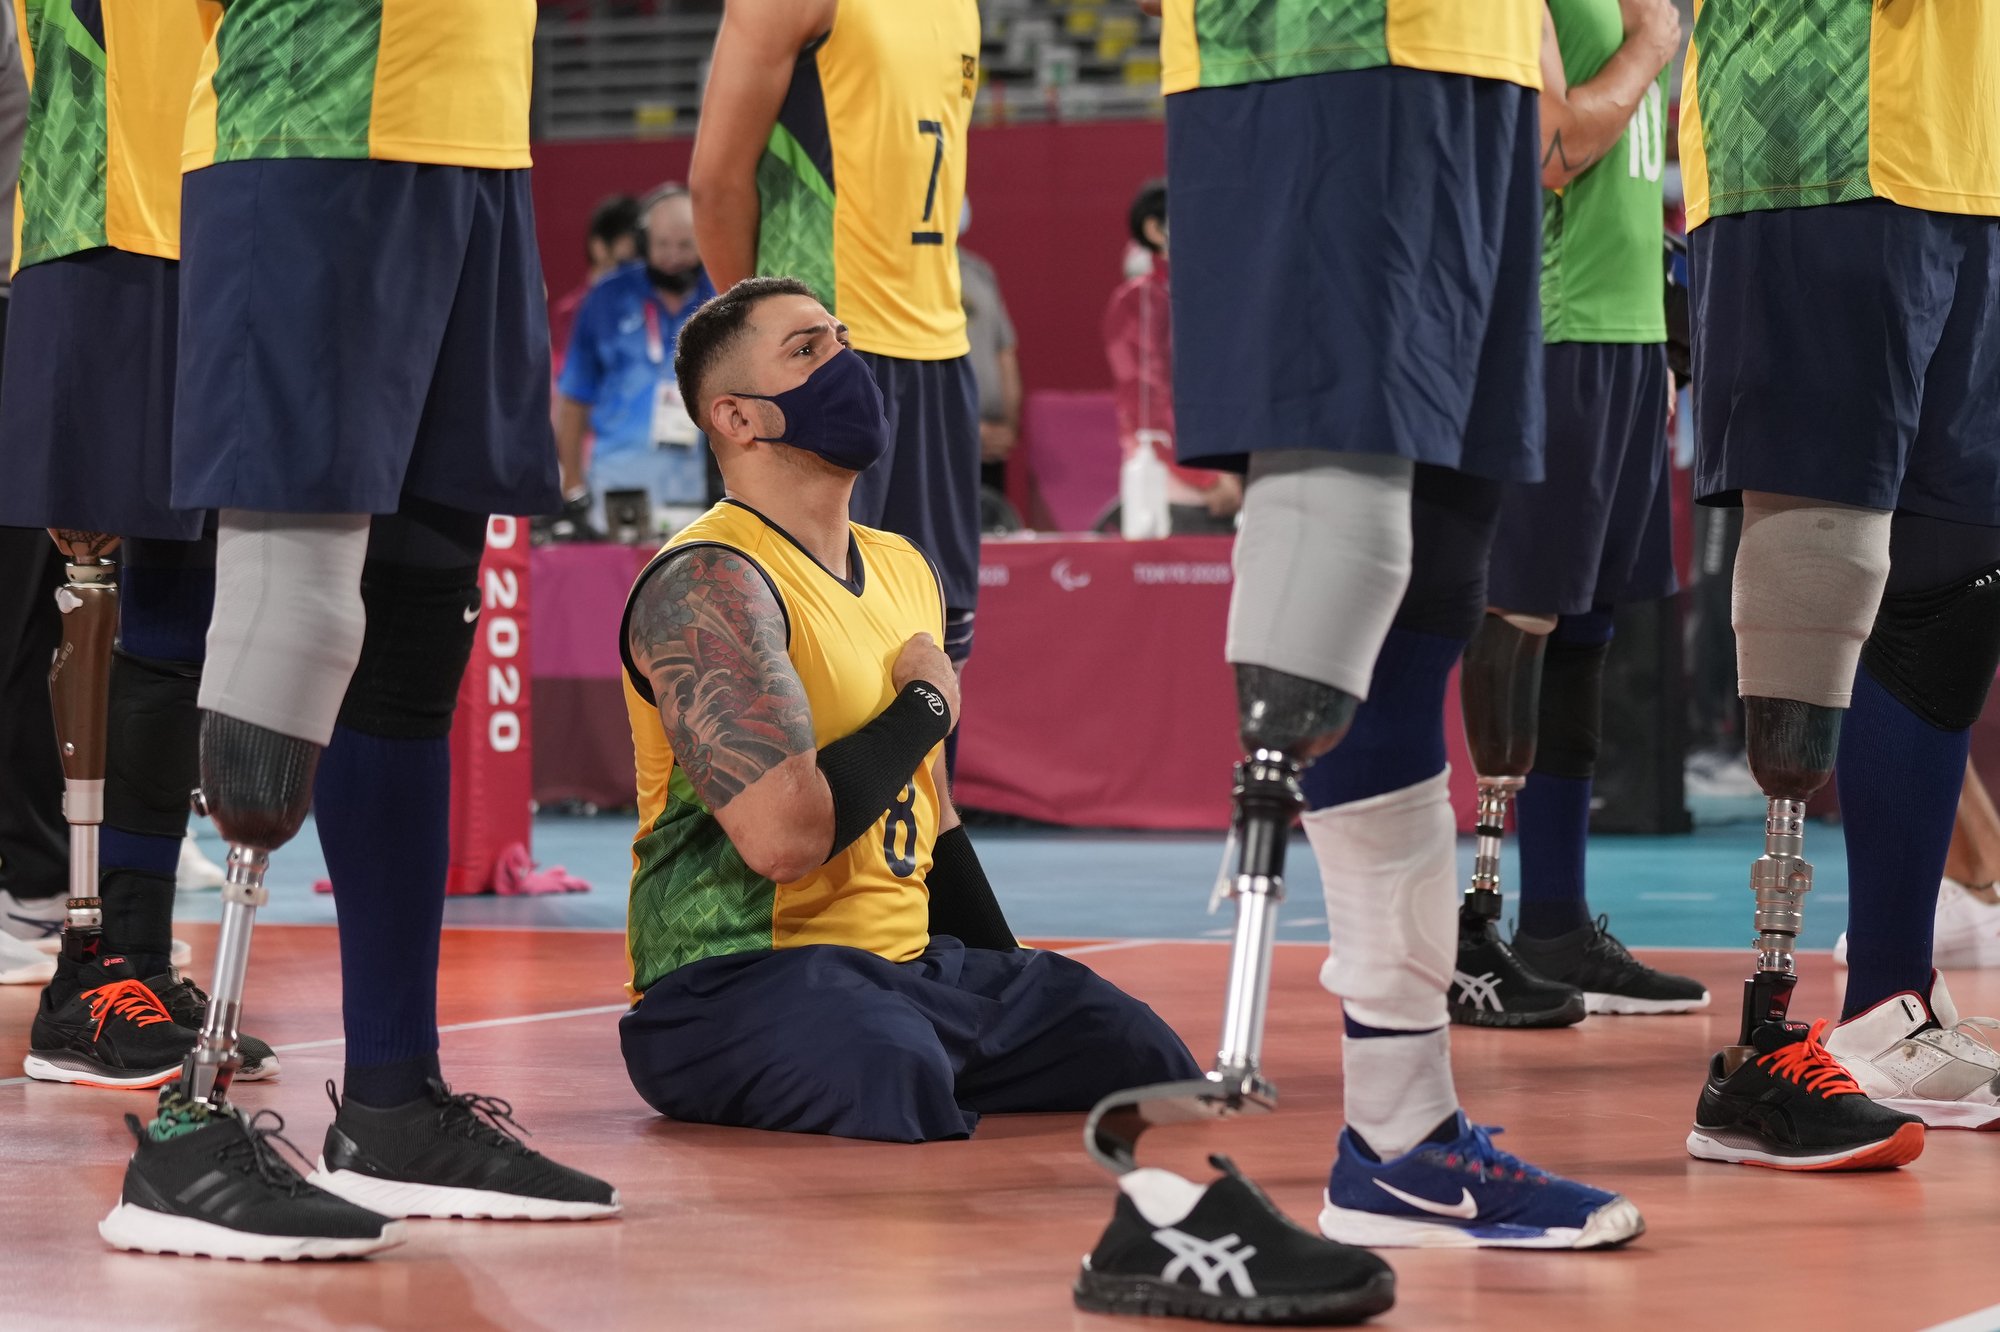  Brazil's Daniel Yoshizawa sings the national anthem with teammates before the men's sitting volleyball semifinal against Russian Paralympic Committee at Tokyo 2020 Paralympic Games, Thursday, Sept. 2, 2021, in Chiba, east of Tokyo, Japan. (AP Photo/